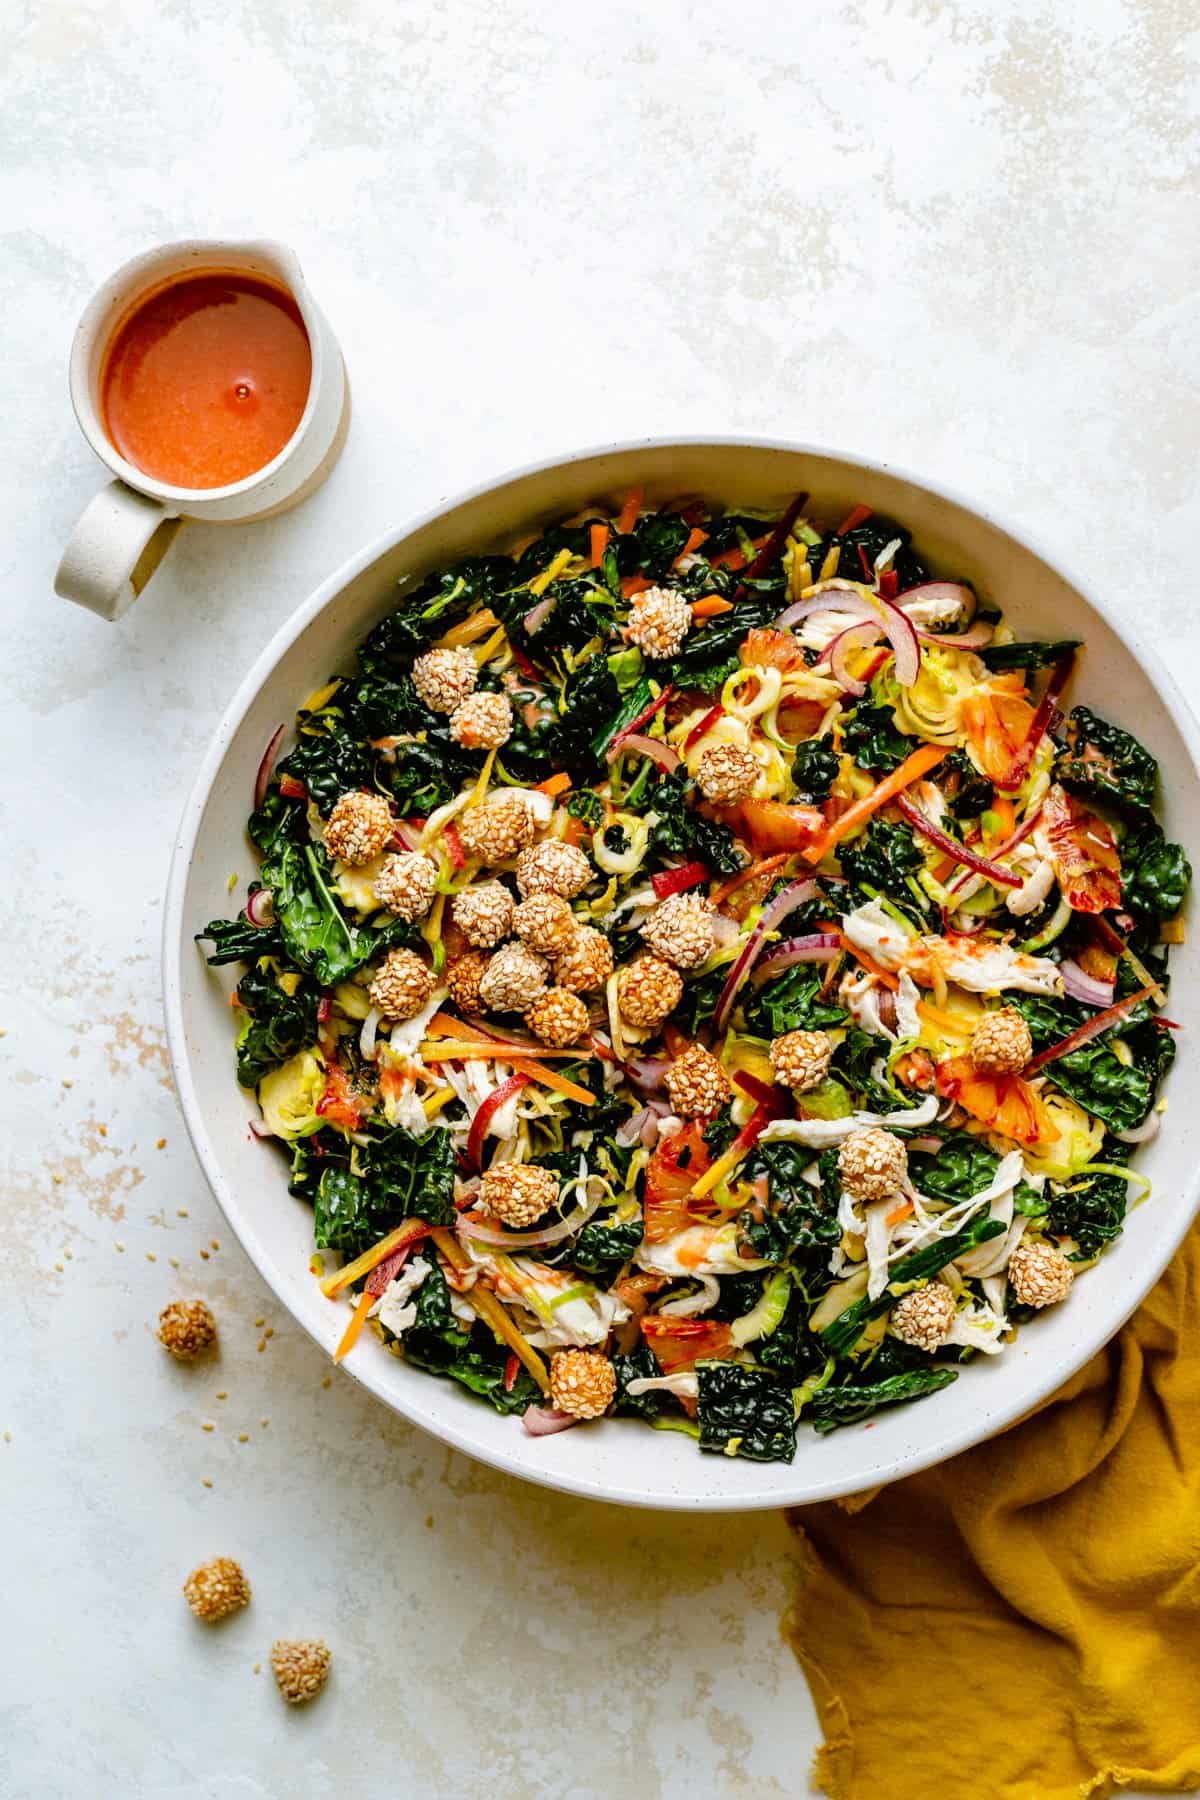 Kale citrus salad assembled and dressed in a serving bowl with crispy sesame chickpeas on top with a jug of dressing nearby.